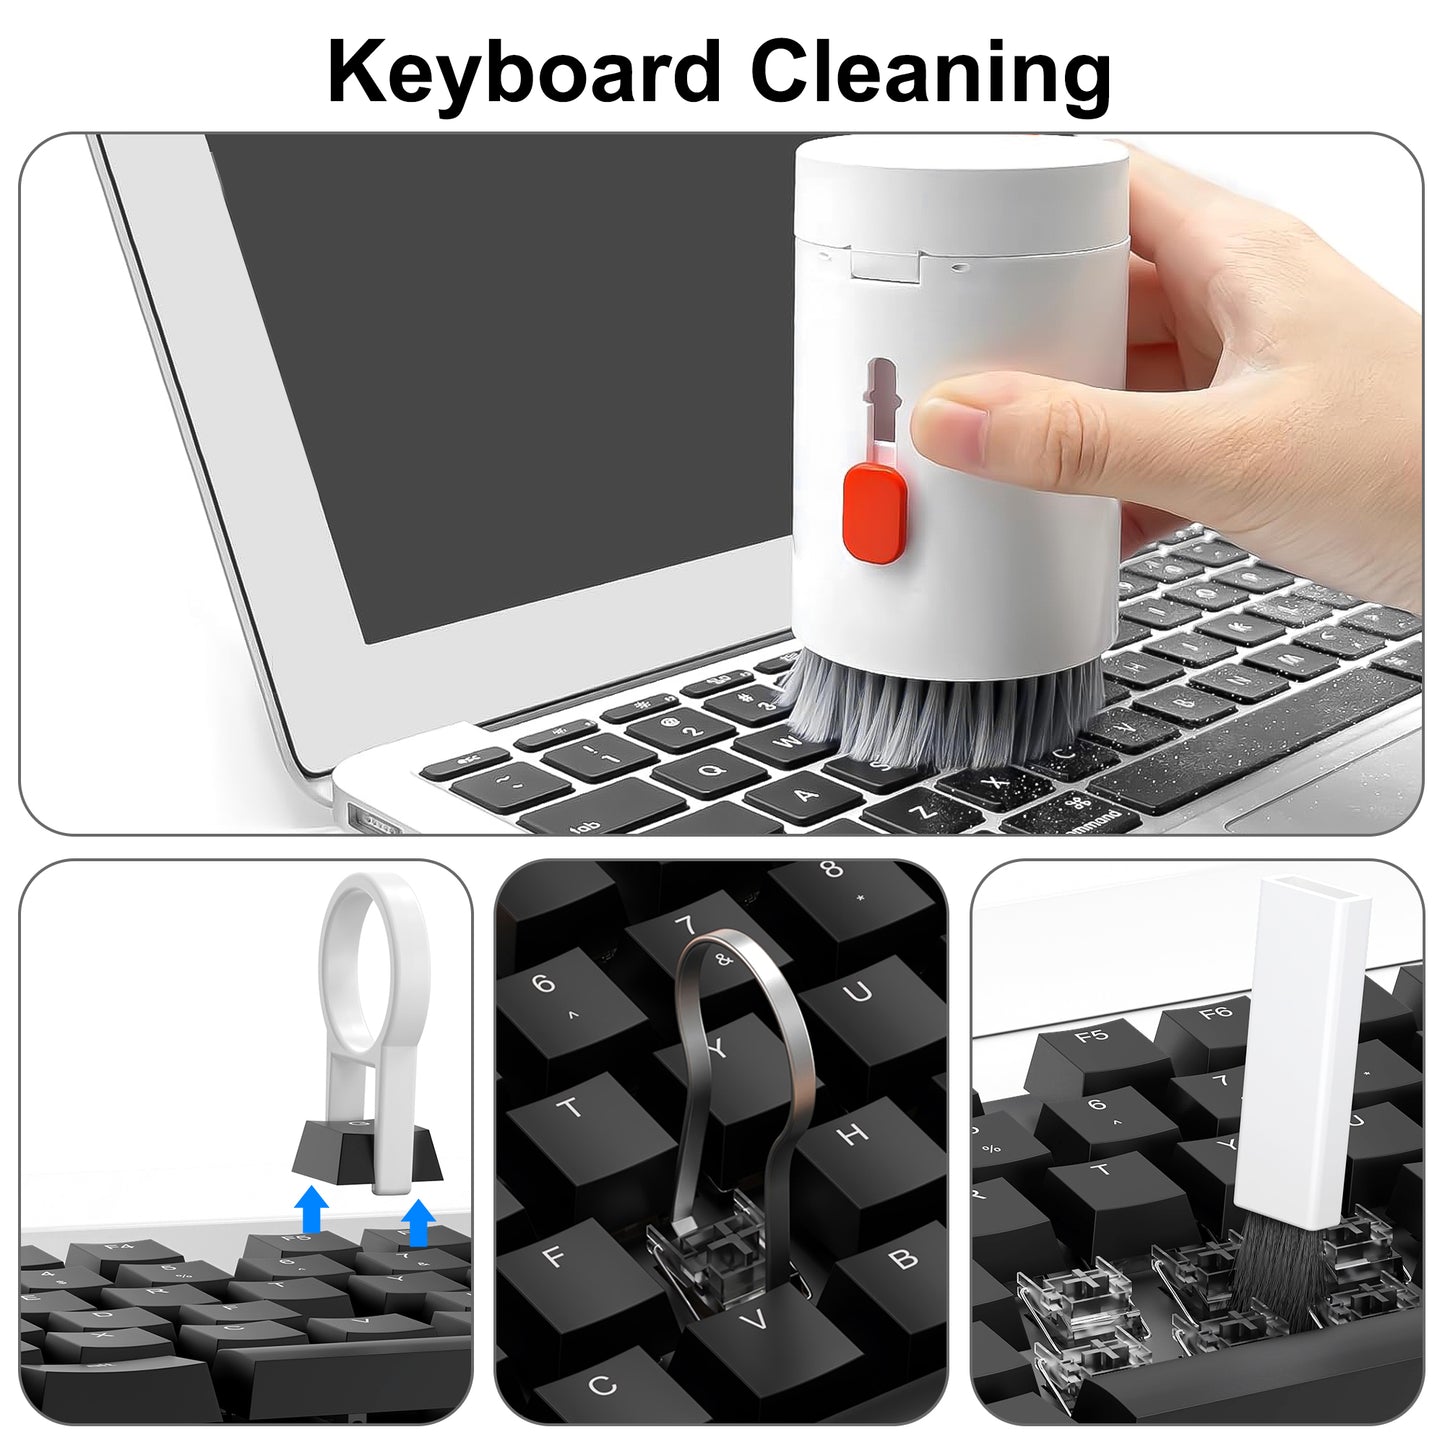 20 in 1 Multifunctional Cleaning Brush Set - Device Cleaner Kit,Keyboard Cleaning Tool,Laptop Screen Cleaning Tool for Phone Computer Earphones Camera Lens